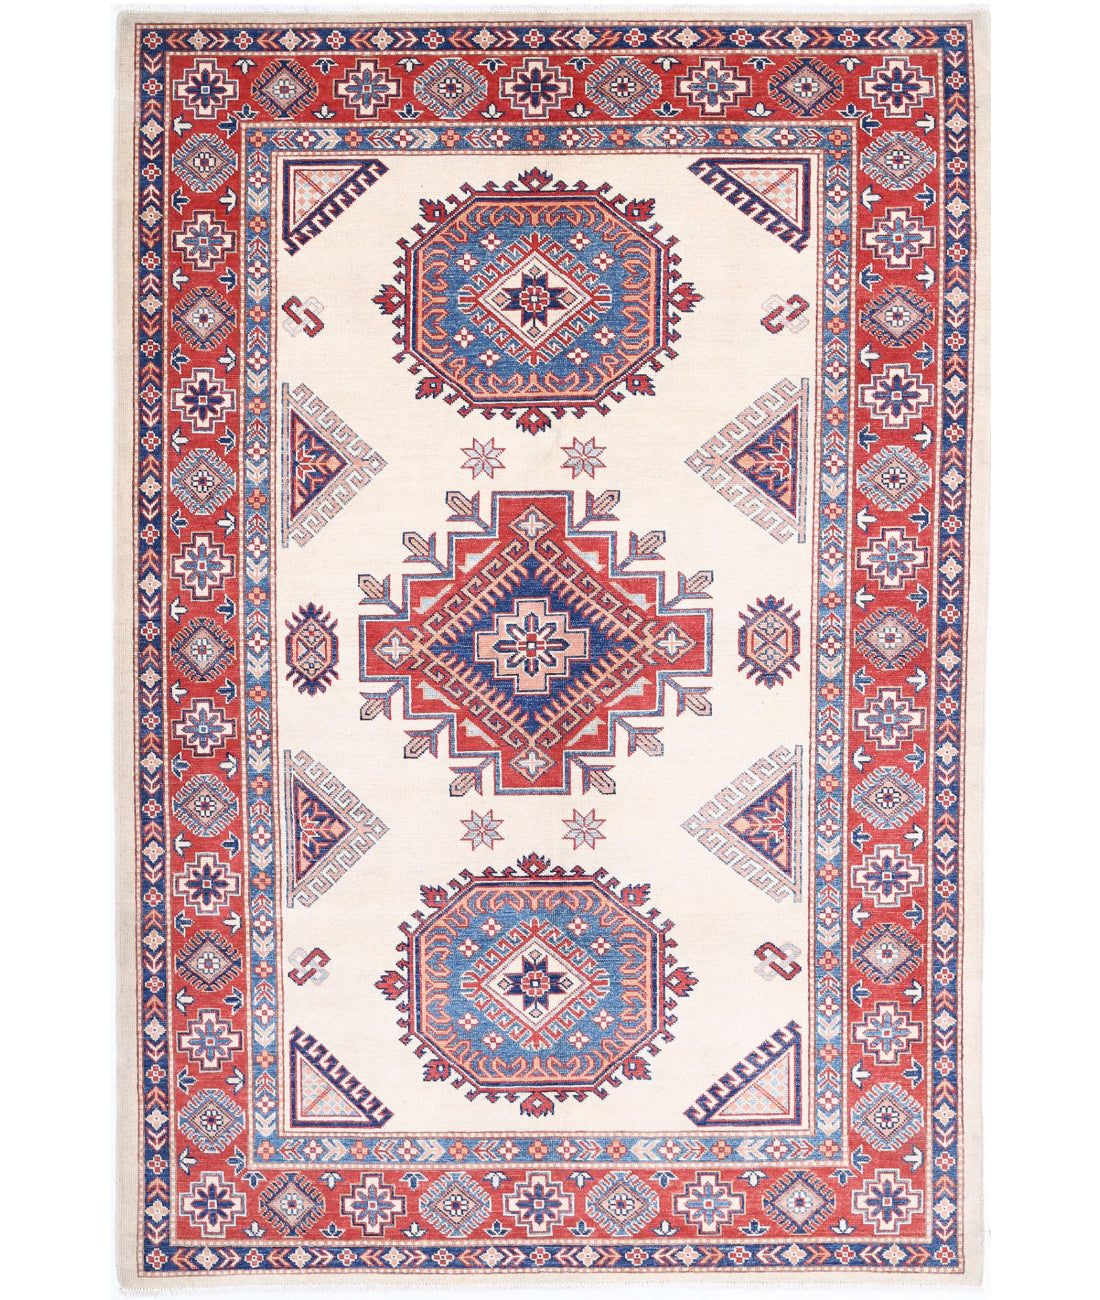 Hand Knotted Tribal Kazak Wool Rug - 6'0'' x 8'11'' 6'0'' x 8'11'' (180 X 268) / Ivory / Red